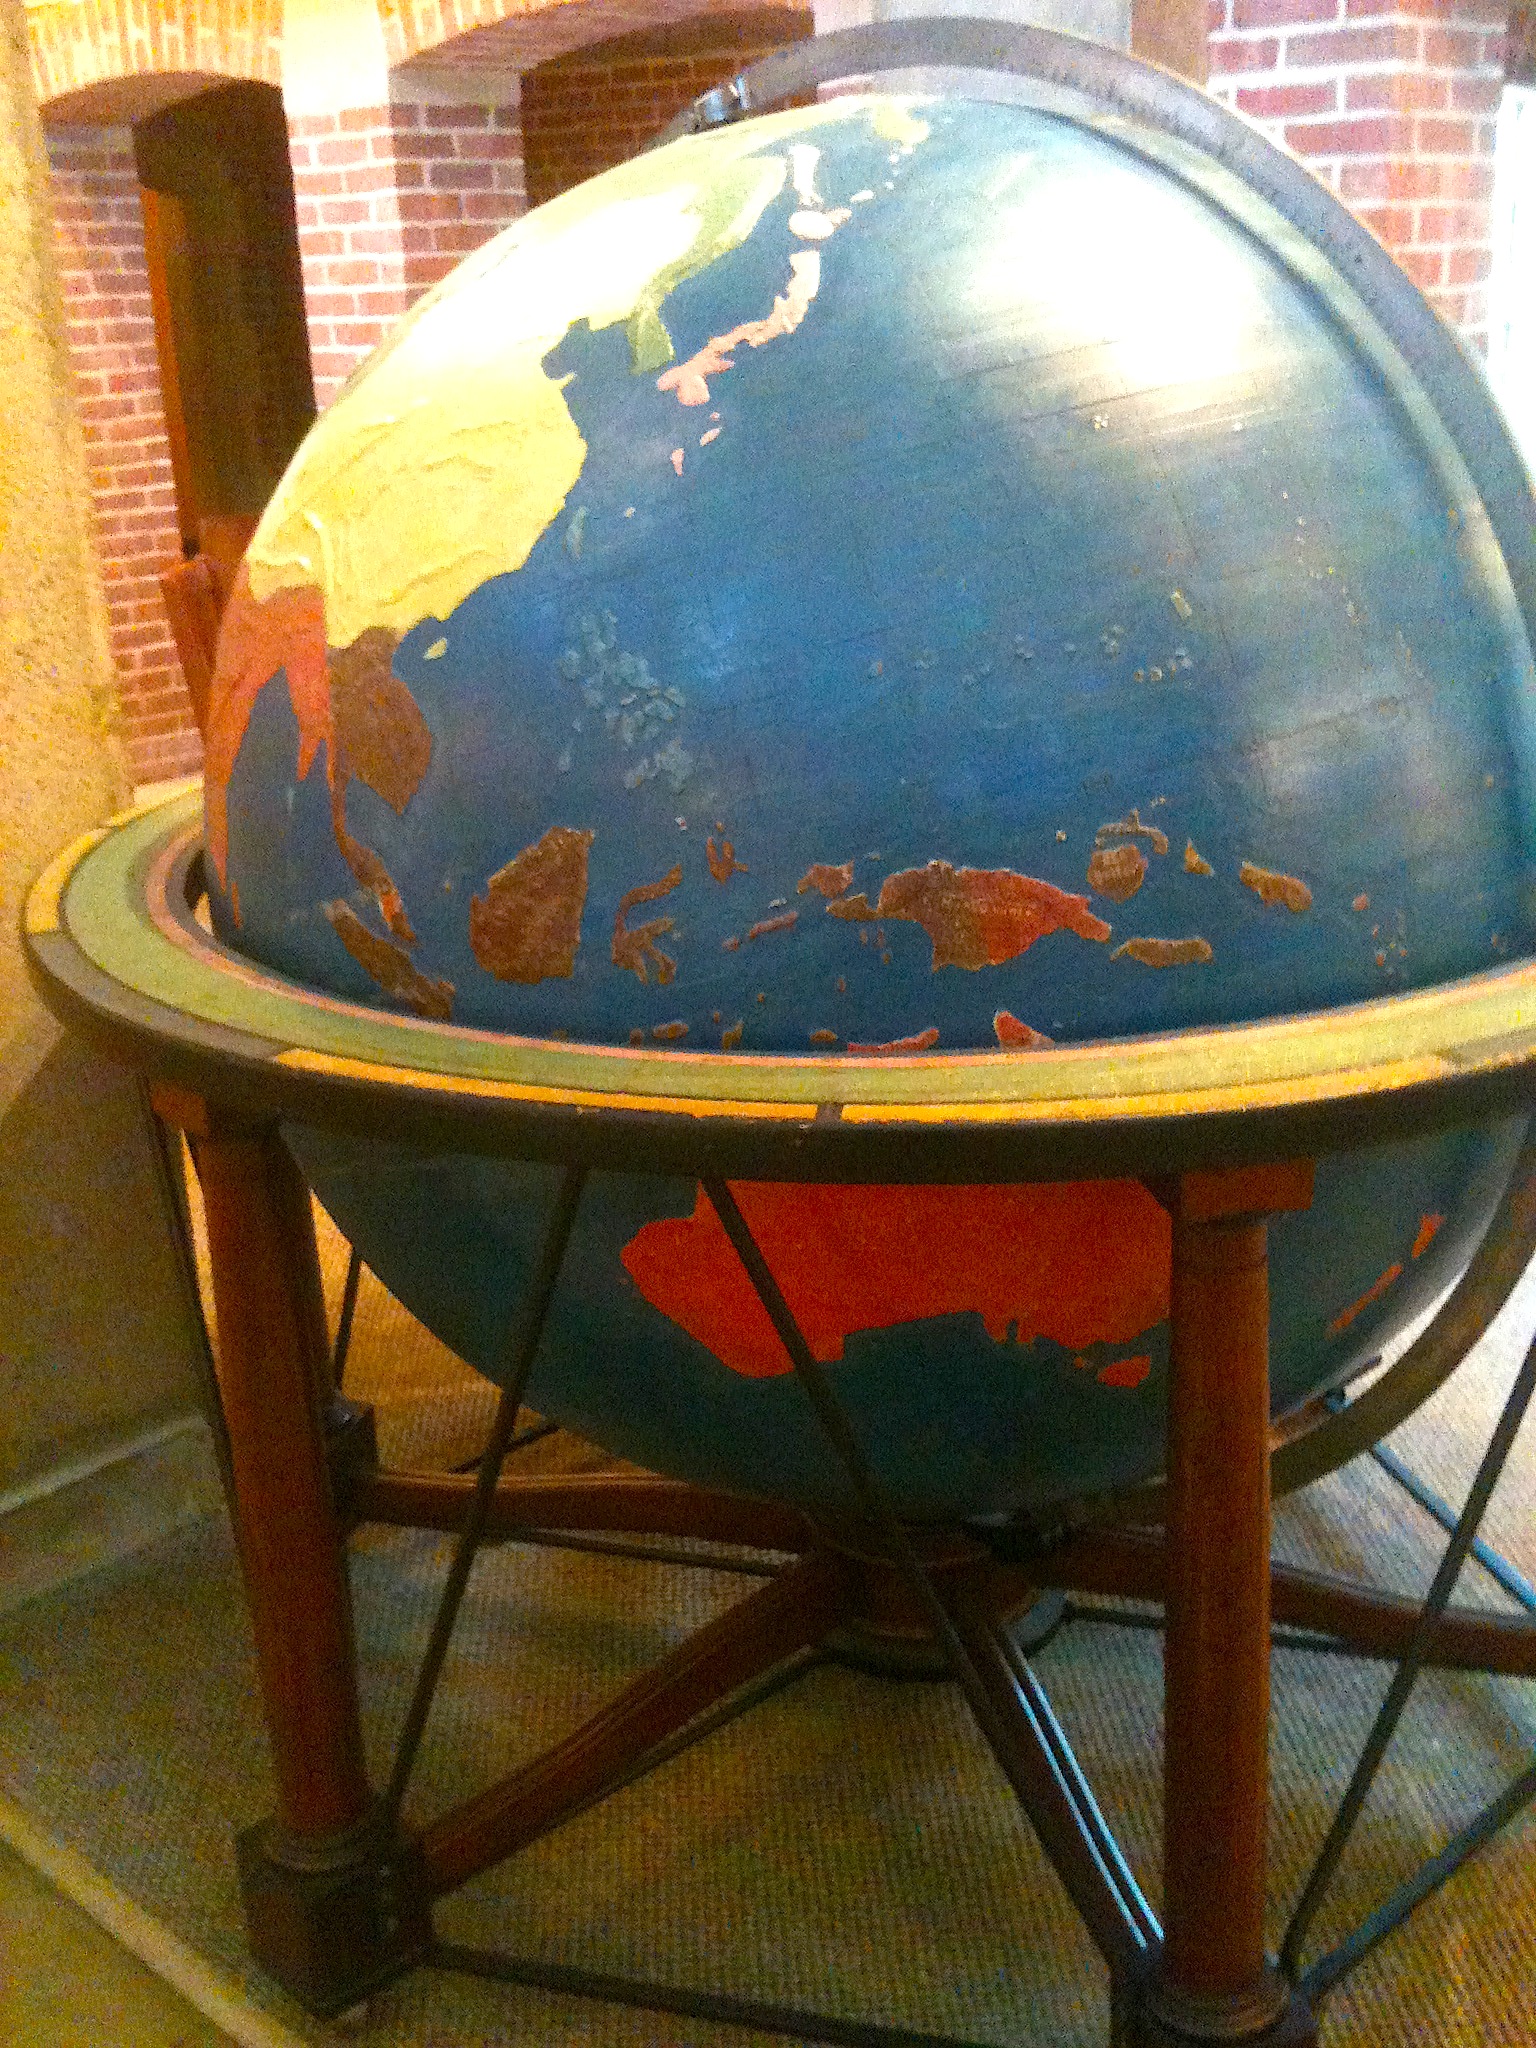 The large-scale haptic globe, with its bumpy mountain ranges and earth formations. It's the size of a small car.